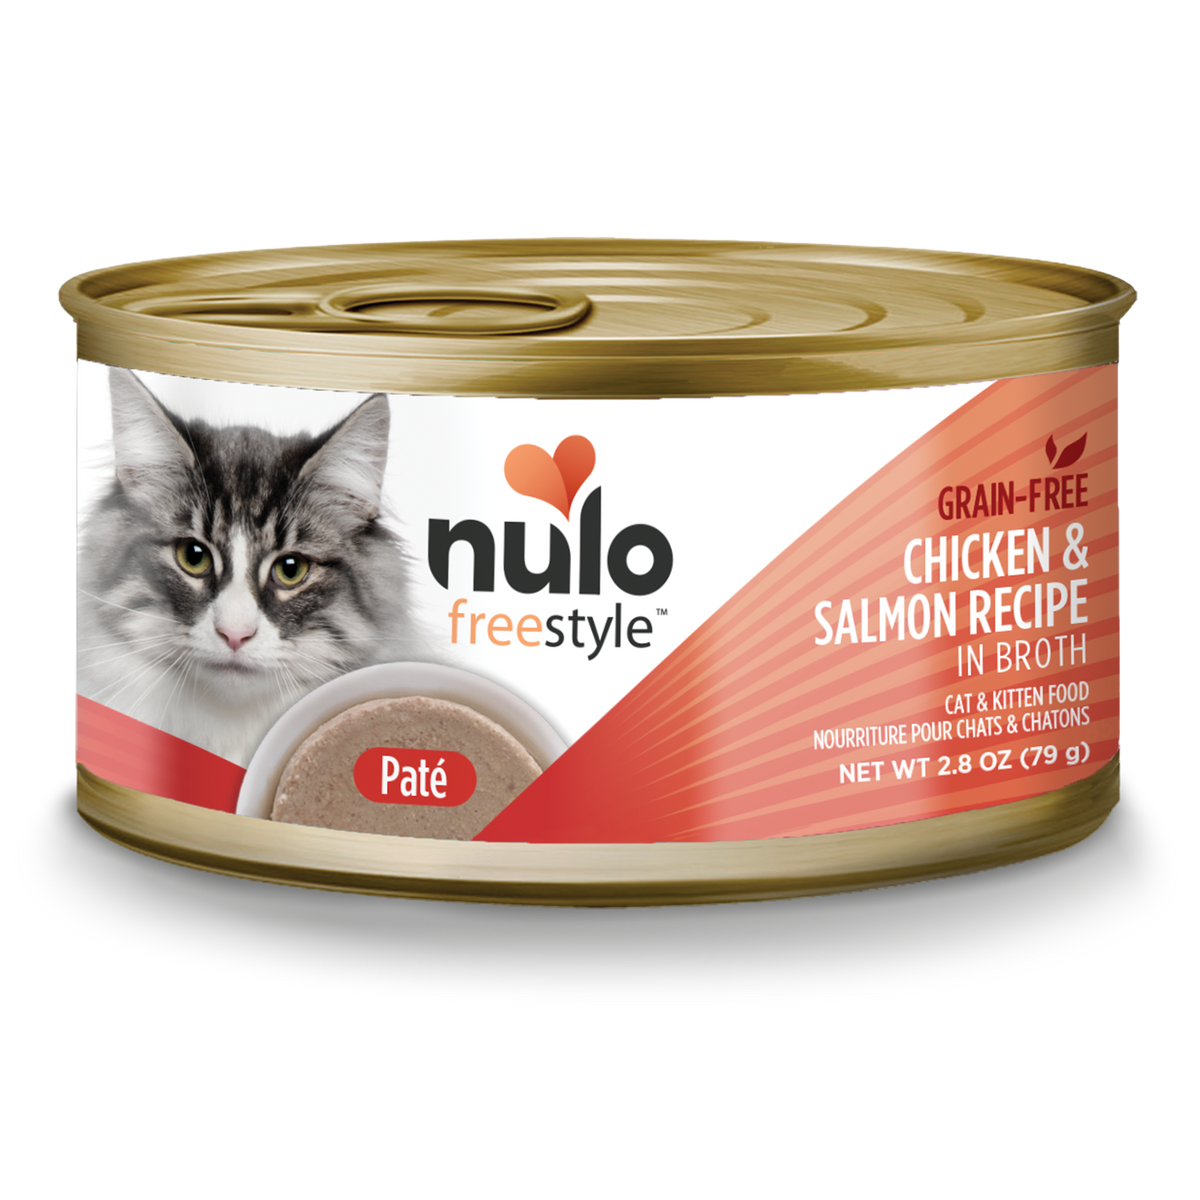 Nulo Freestyle Wet Food Pate 2.8 oz - Cat